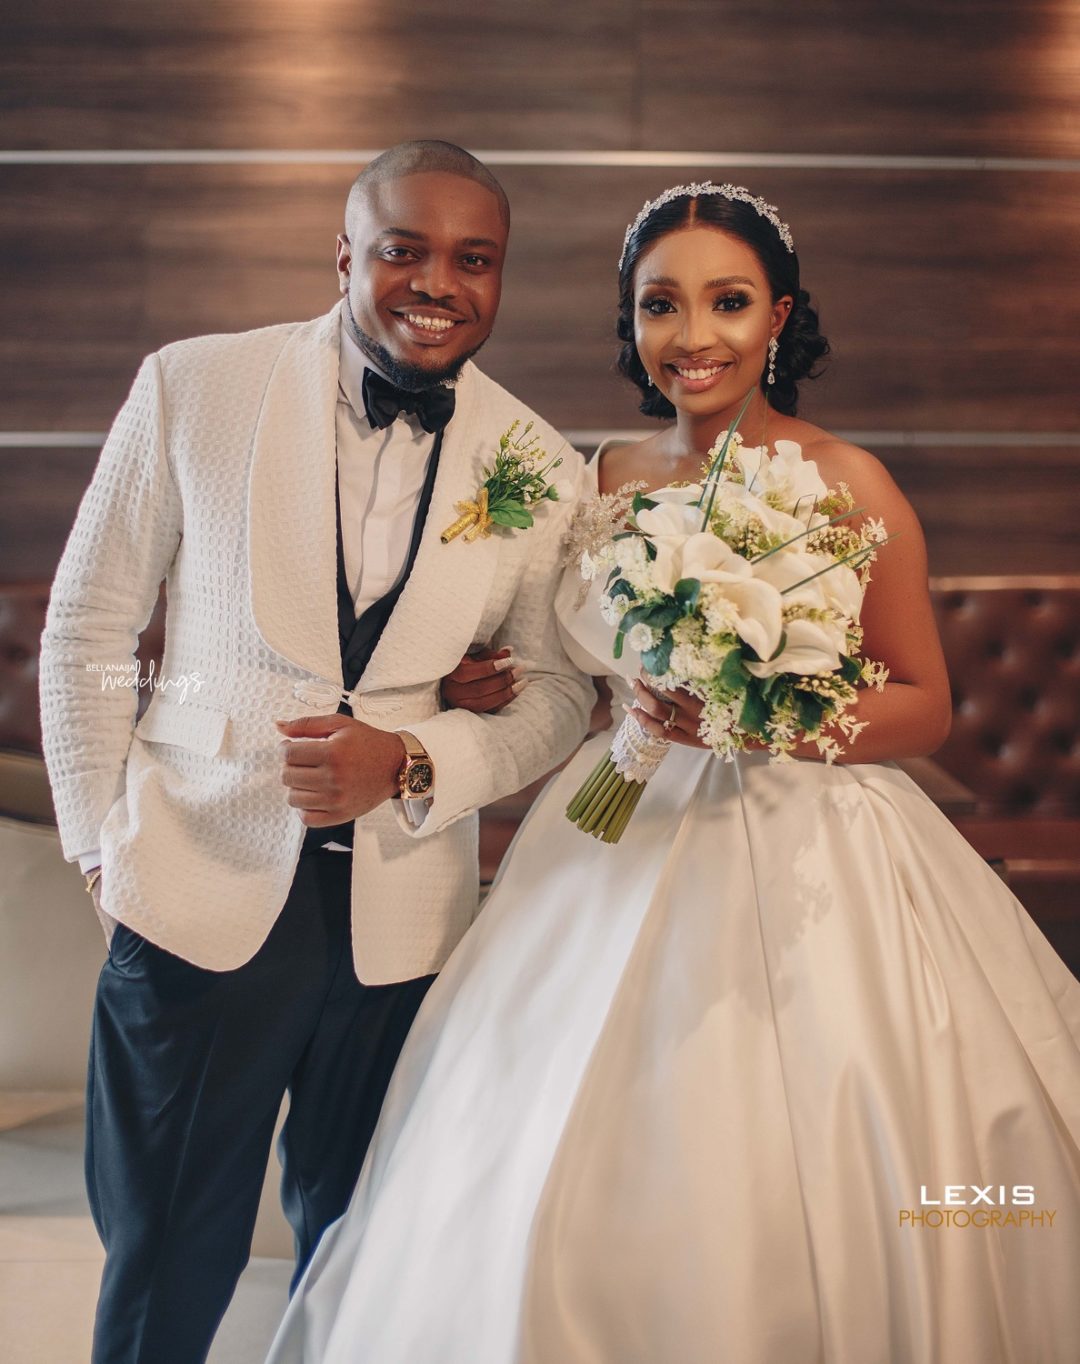 The #AJxperience White Wedding had Us Smiling from Ear to Ear